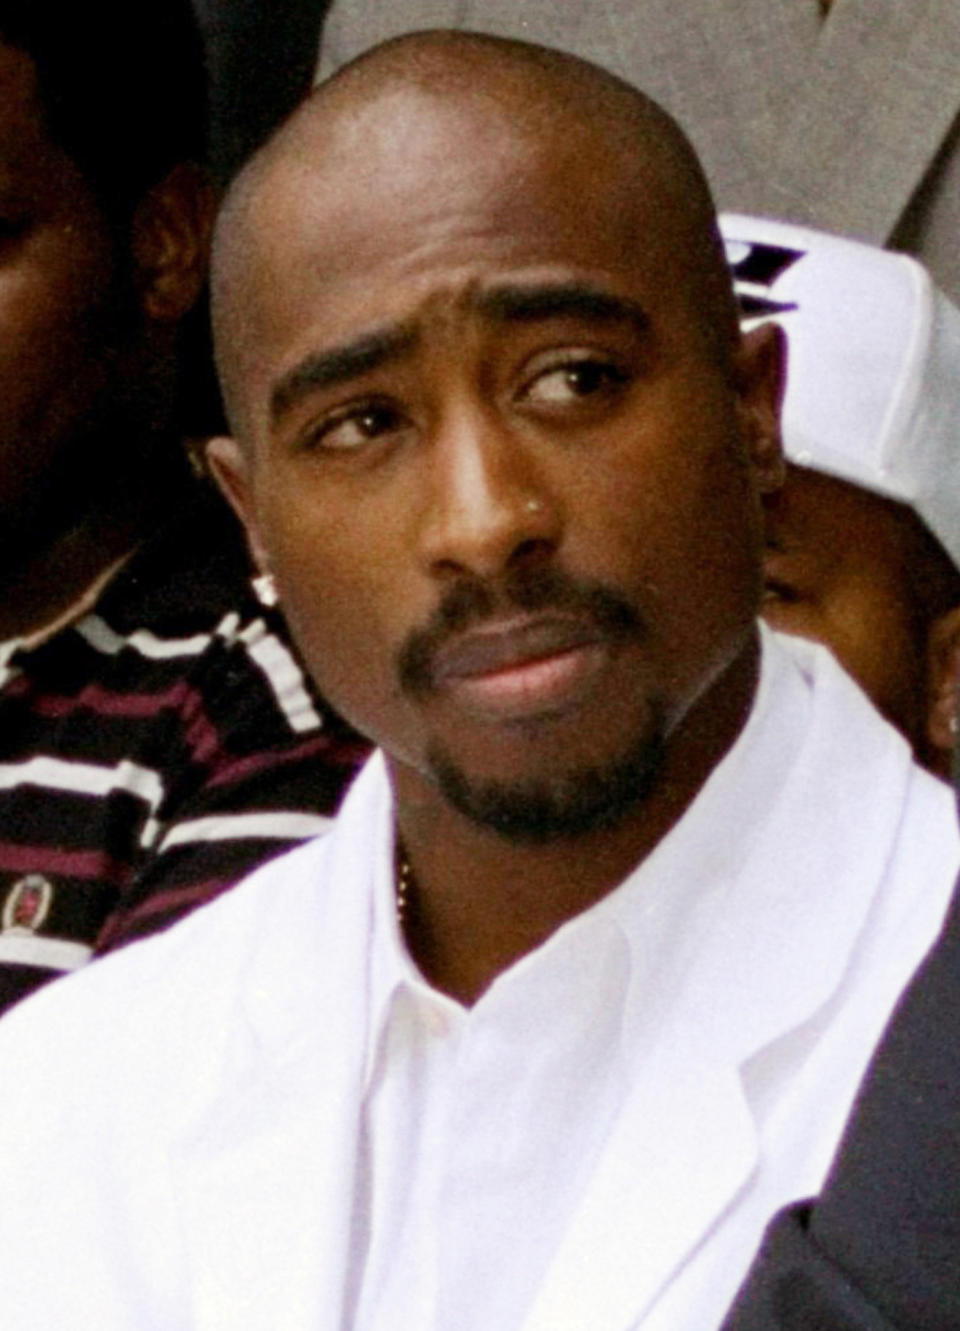 FILE - Rapper Tupac Shakur attends a voter registration event in South Central Los Angeles, Aug. 15, 1996. Authorities in Nevada confirmed Tuesday, July 18, 2023, that they served a search warrant this week in connection with the long-unsolved killing of the late rapper Shakur. (AP Photo/Frank Wiese, File)